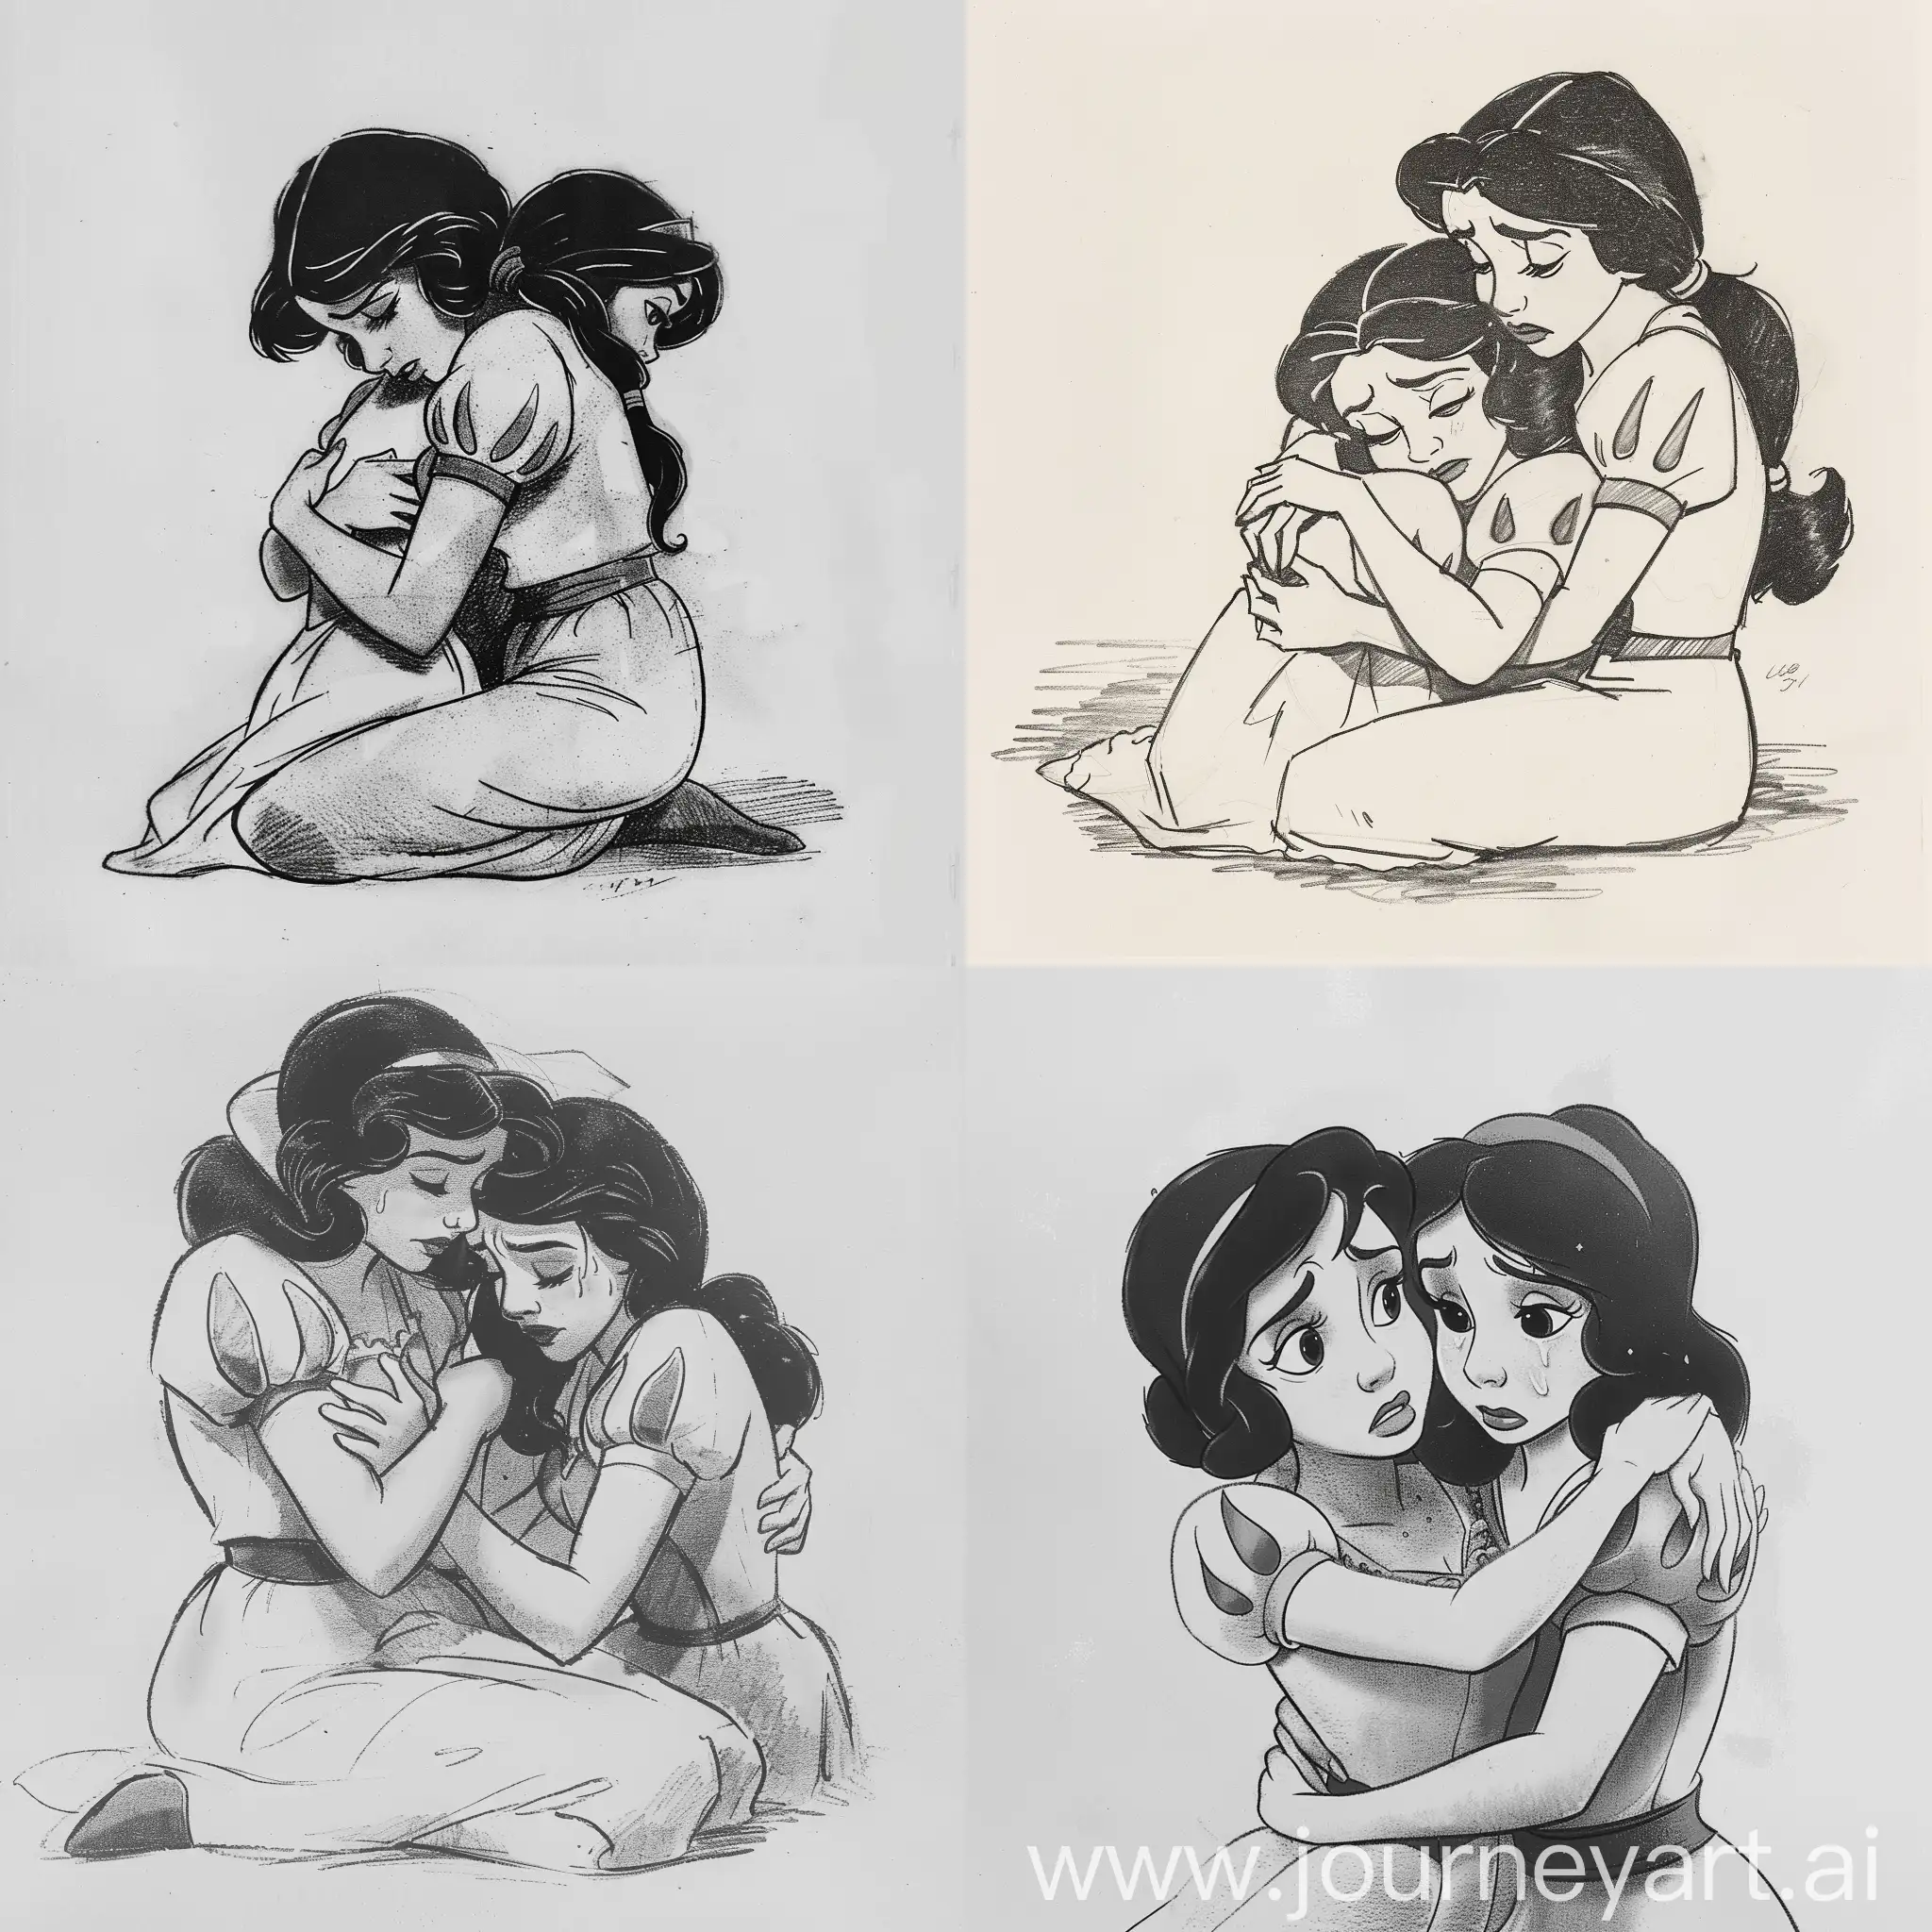 Lesbians sleeve short princess snow white crying drop hug sitting lying head against the chest Princess jasmine rip and Disney drawing 1937s side view not colore 